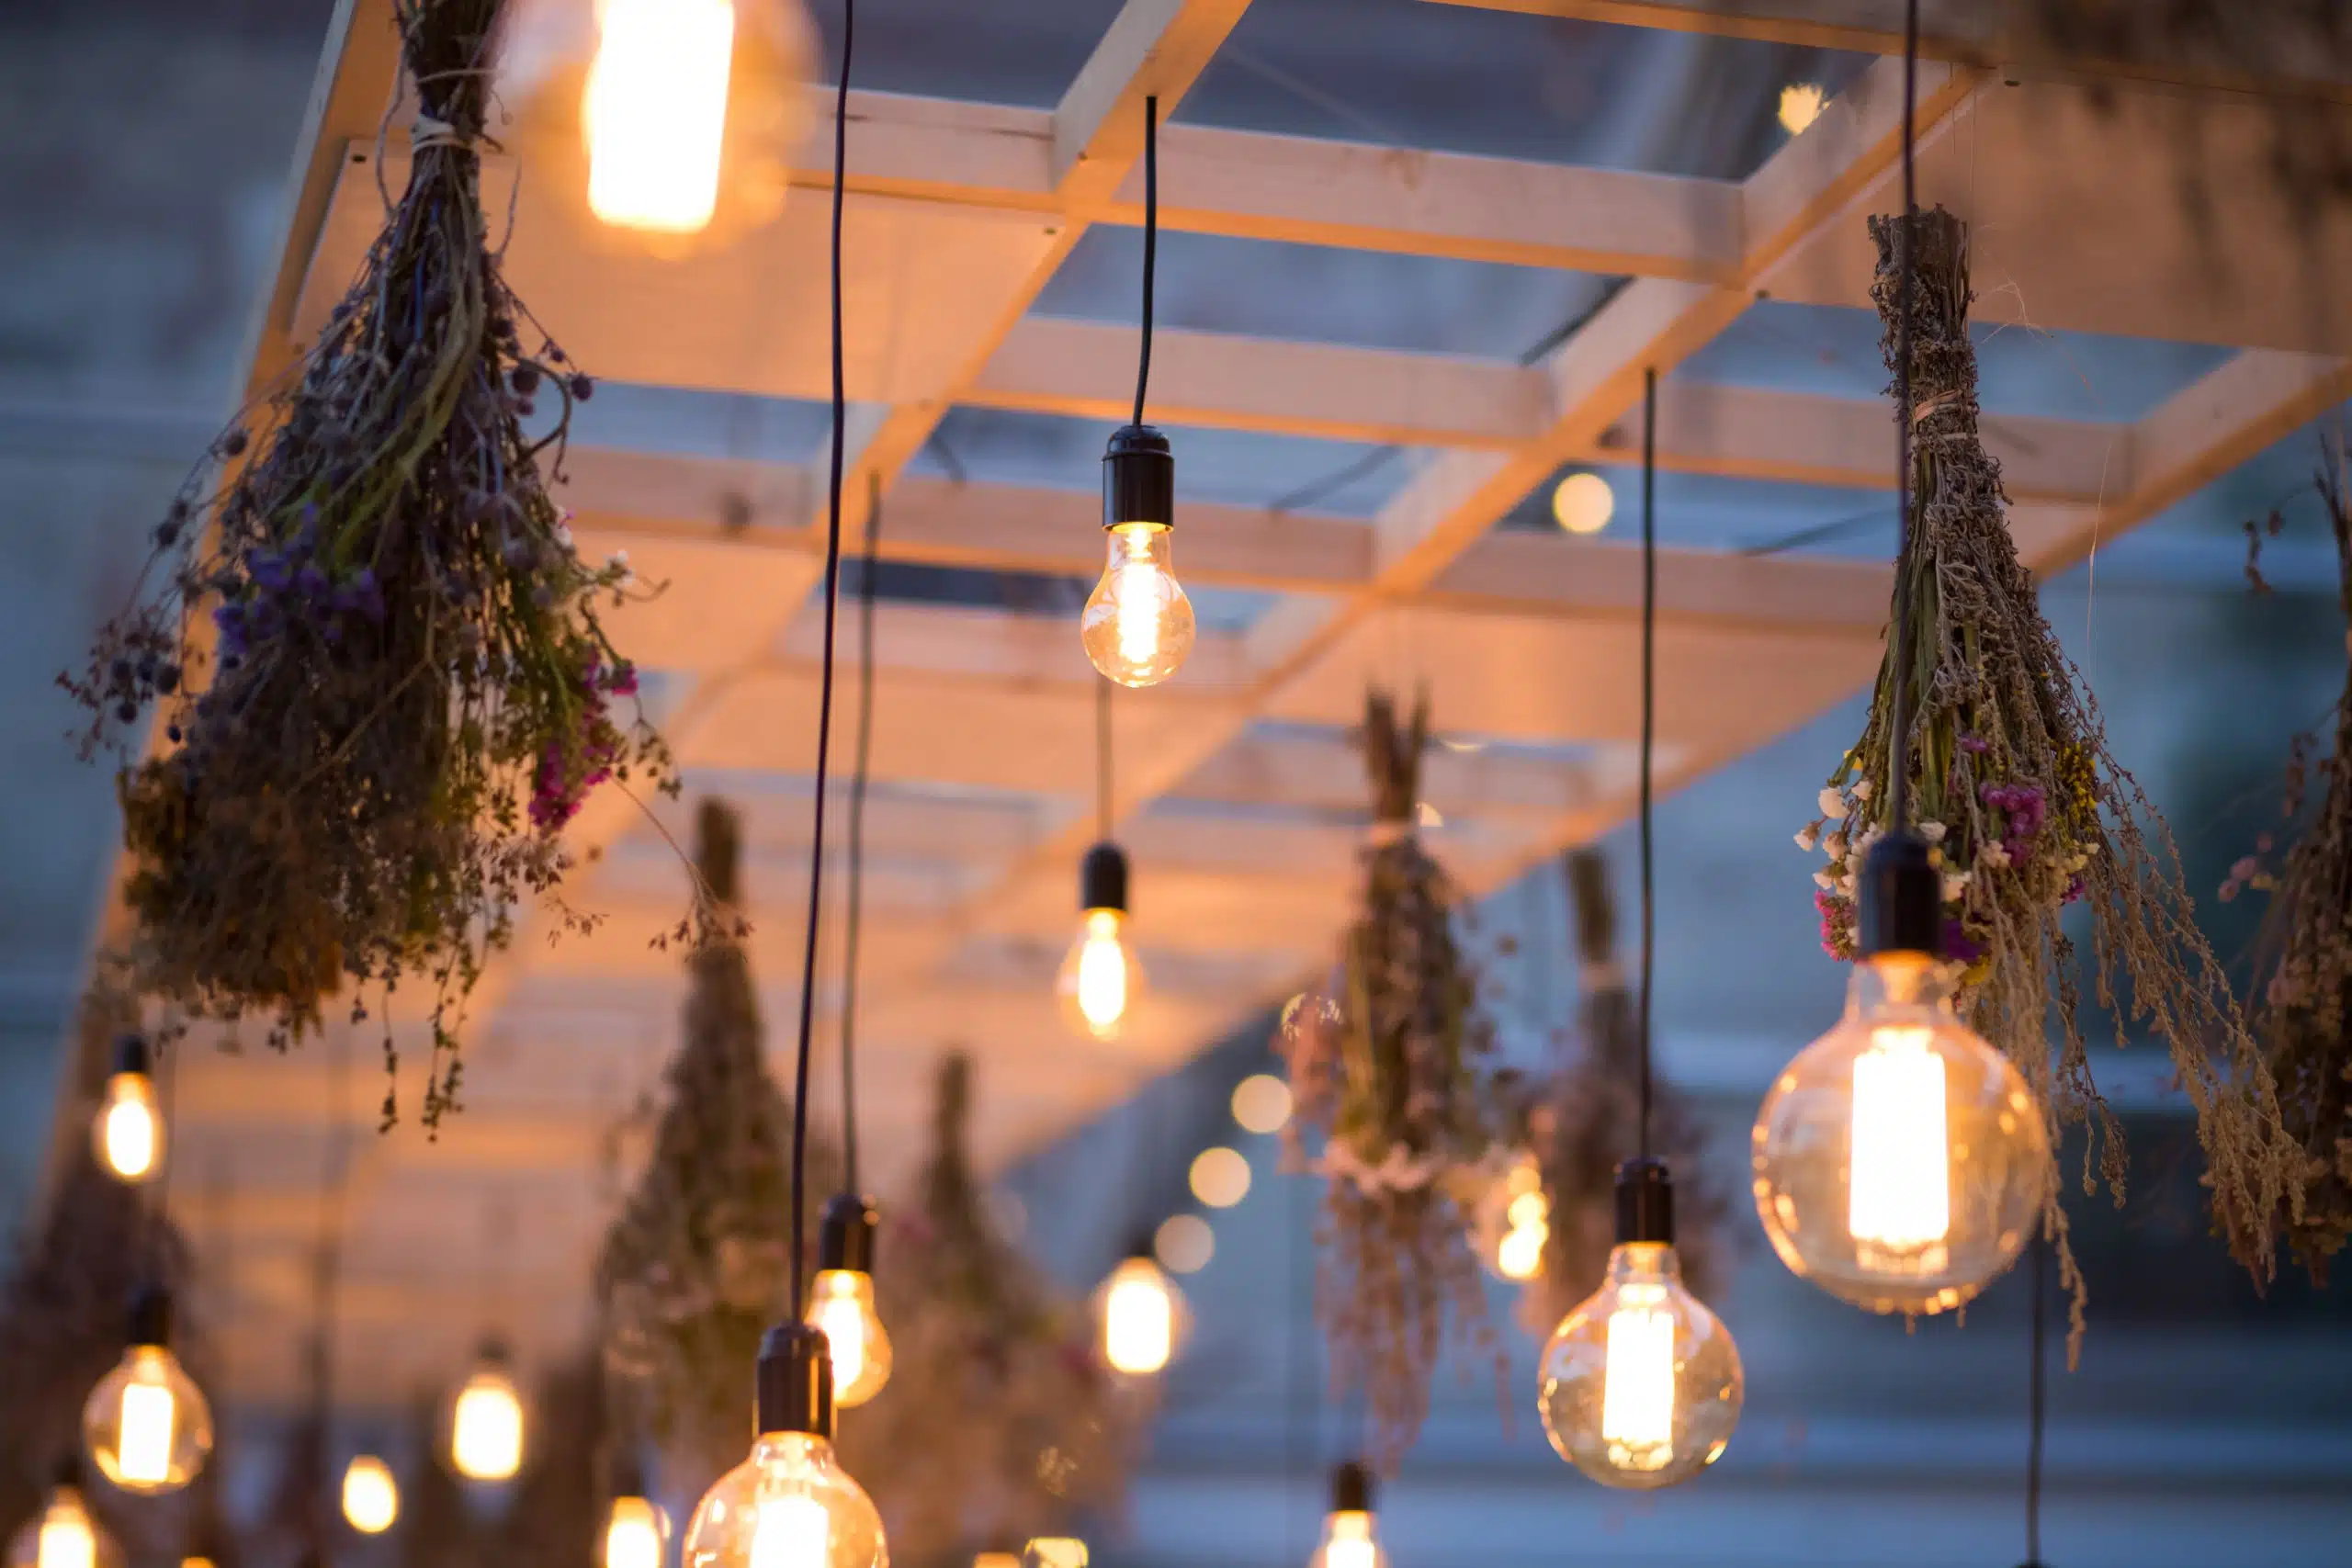 Yellow lights and hanging dried flowers , boho style wedding decor